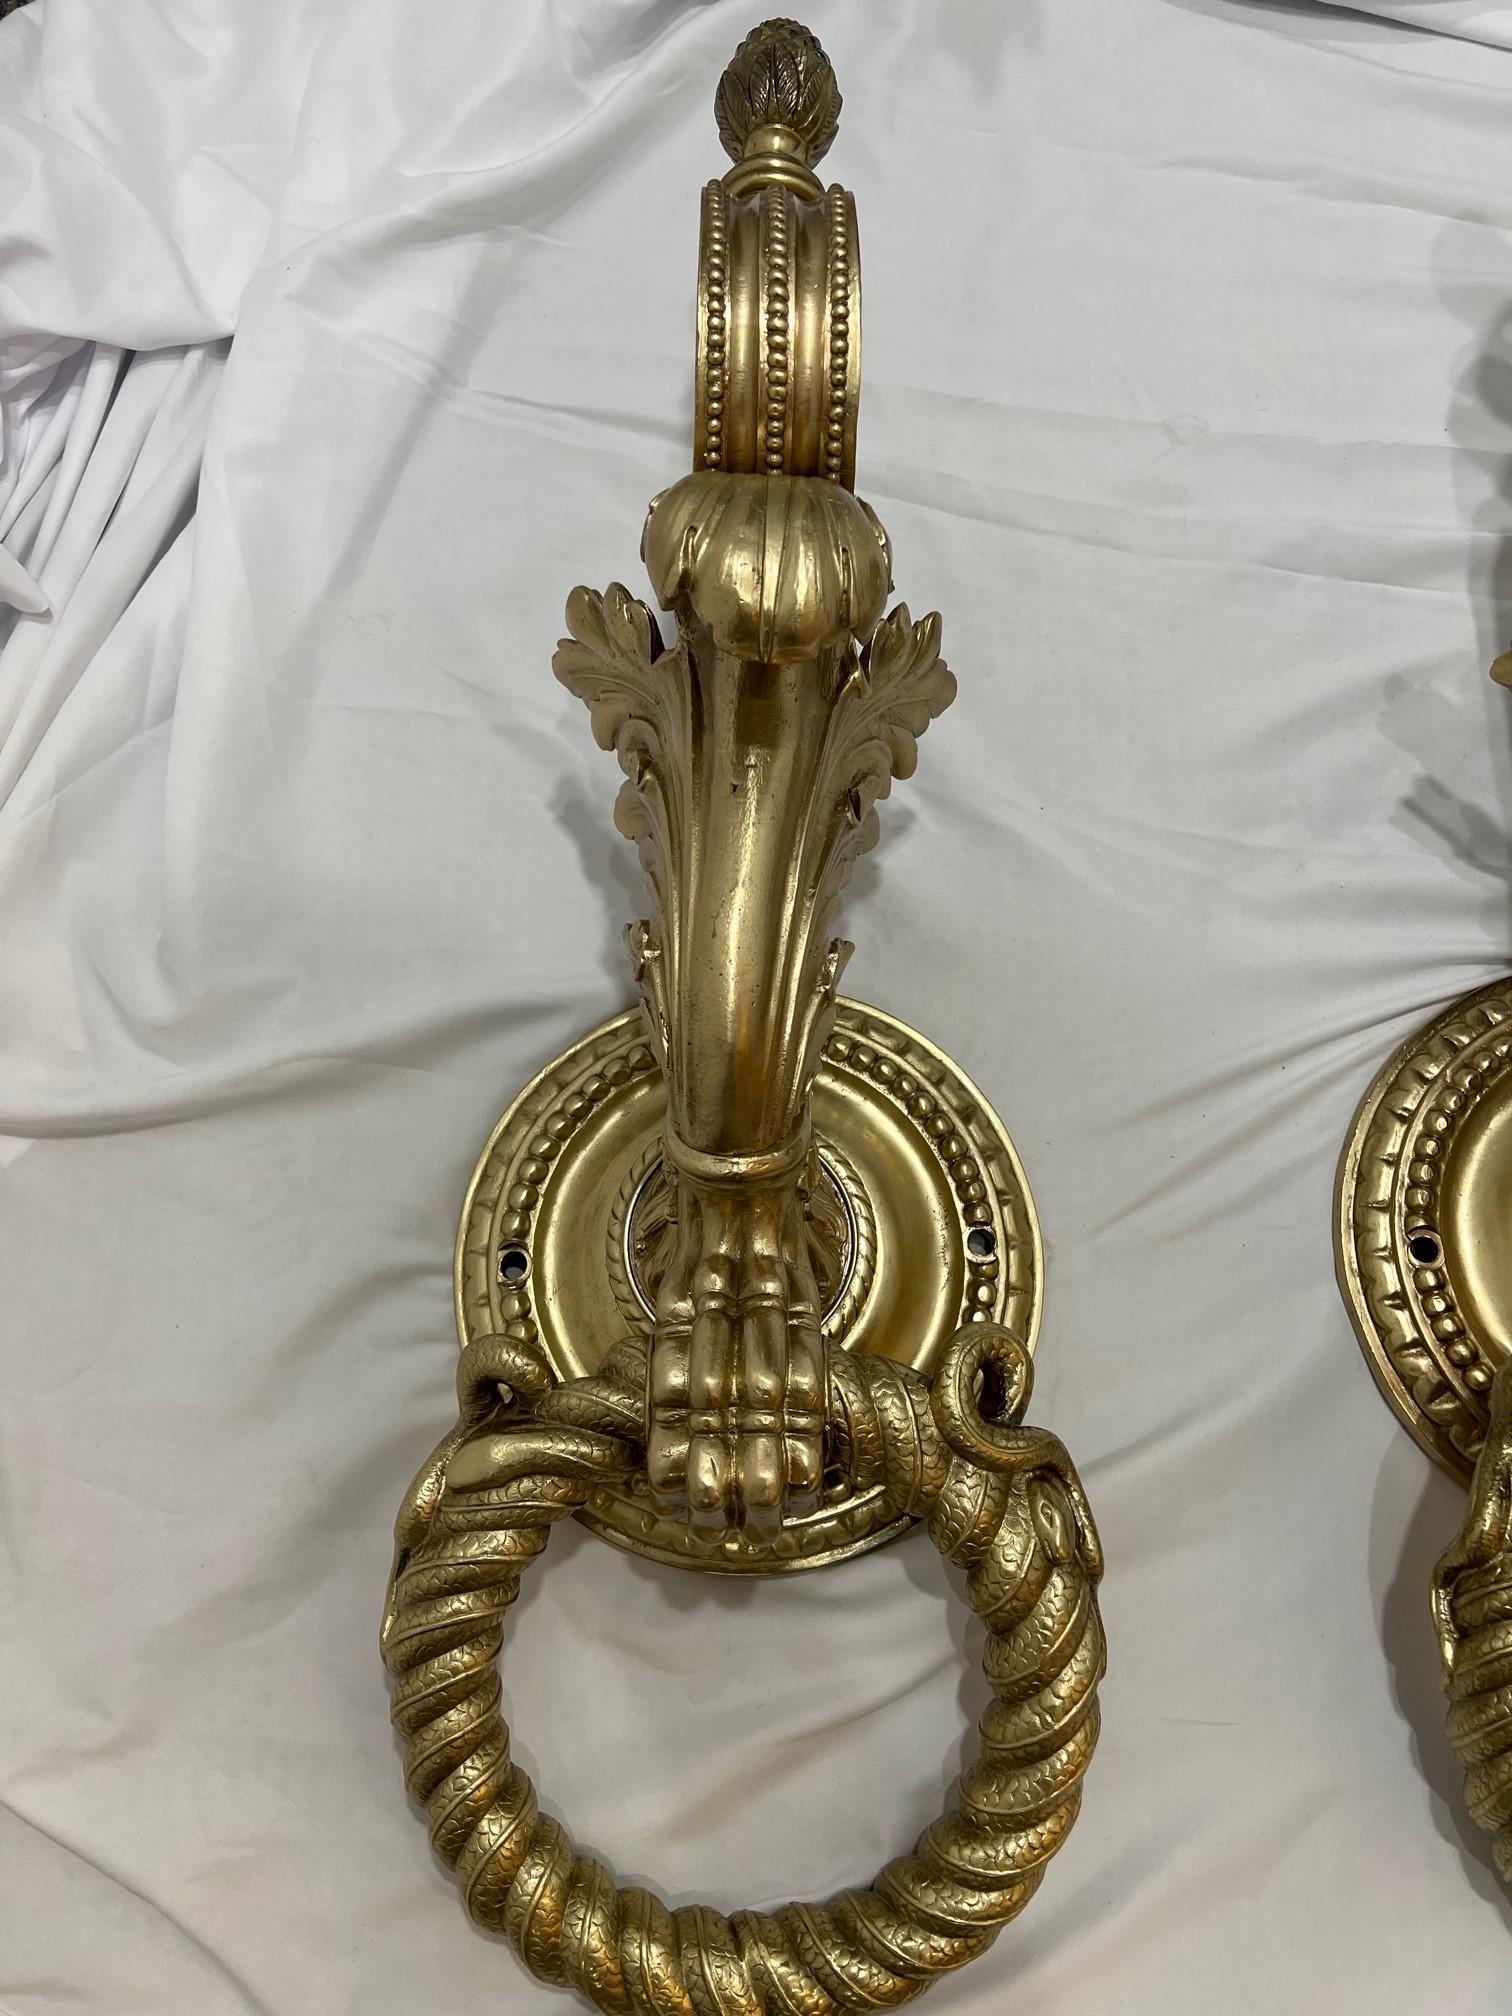 Polished Mid 19th Century Pair of Monumental Antique Architectural Bronze Door Knockers   For Sale